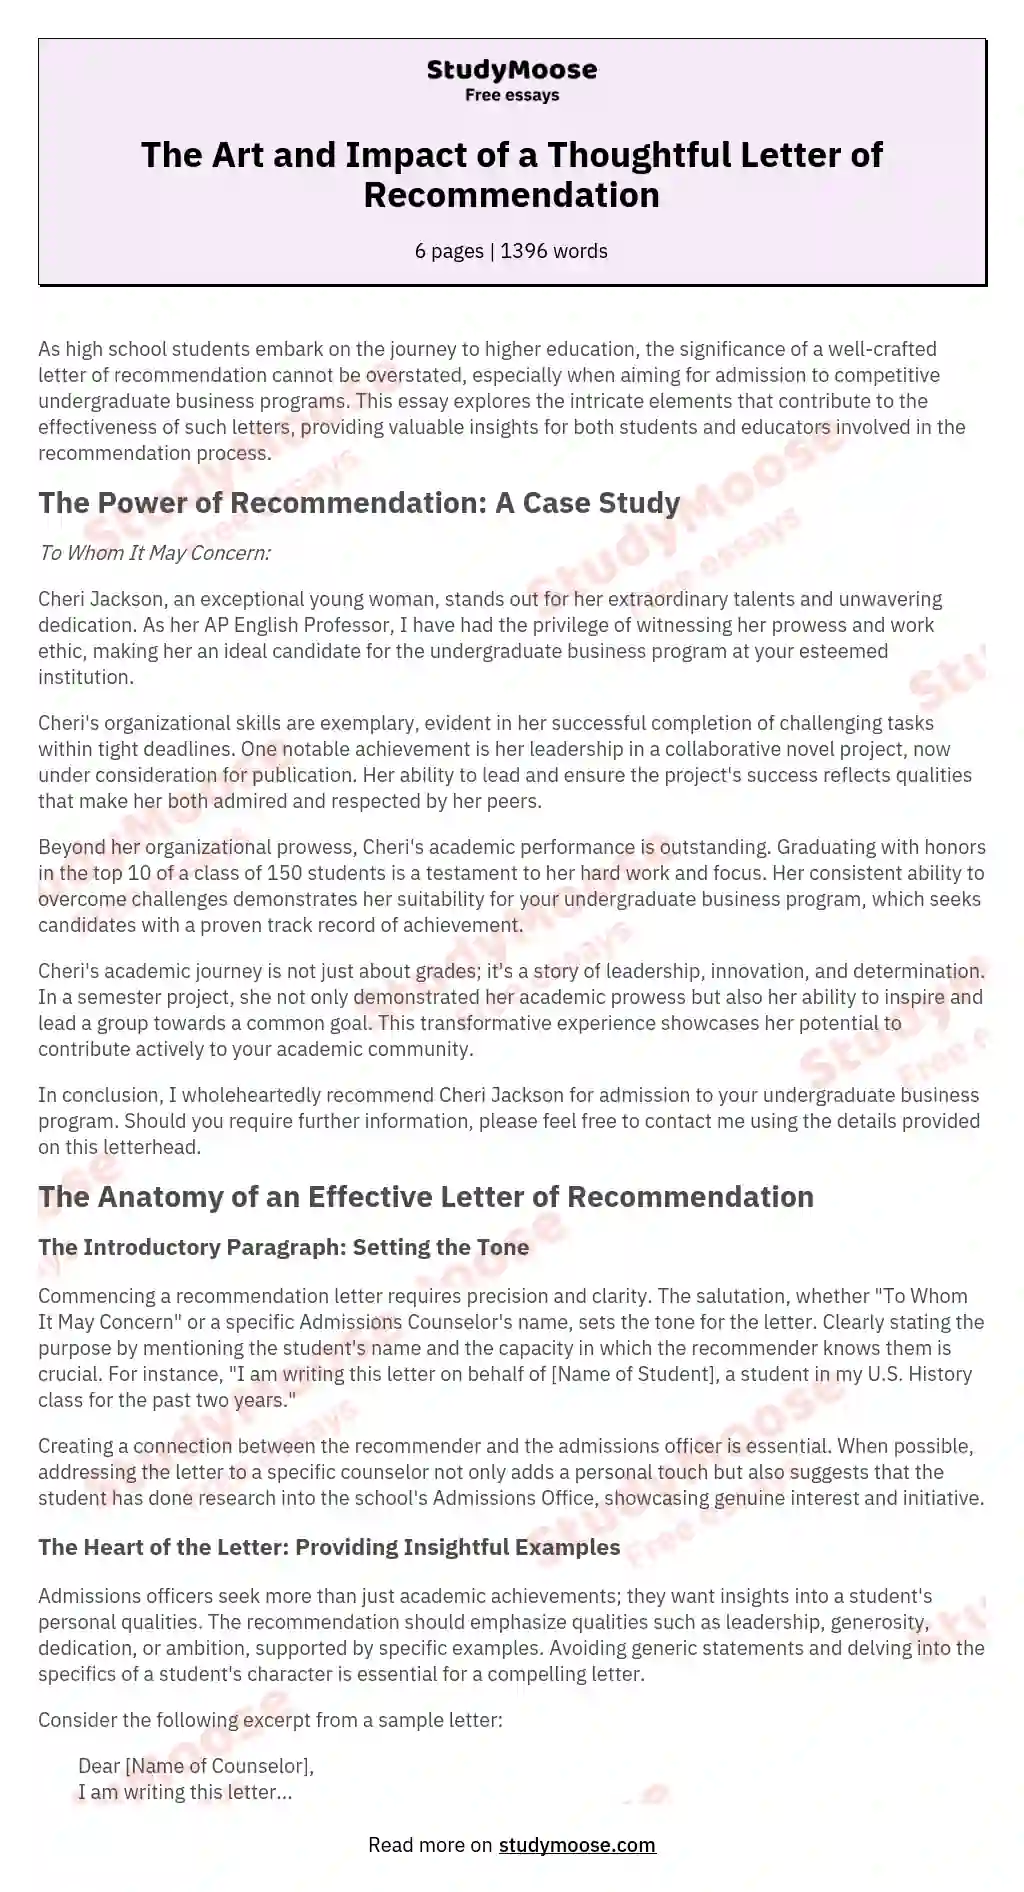 The Art and Impact of a Thoughtful Letter of Recommendation essay